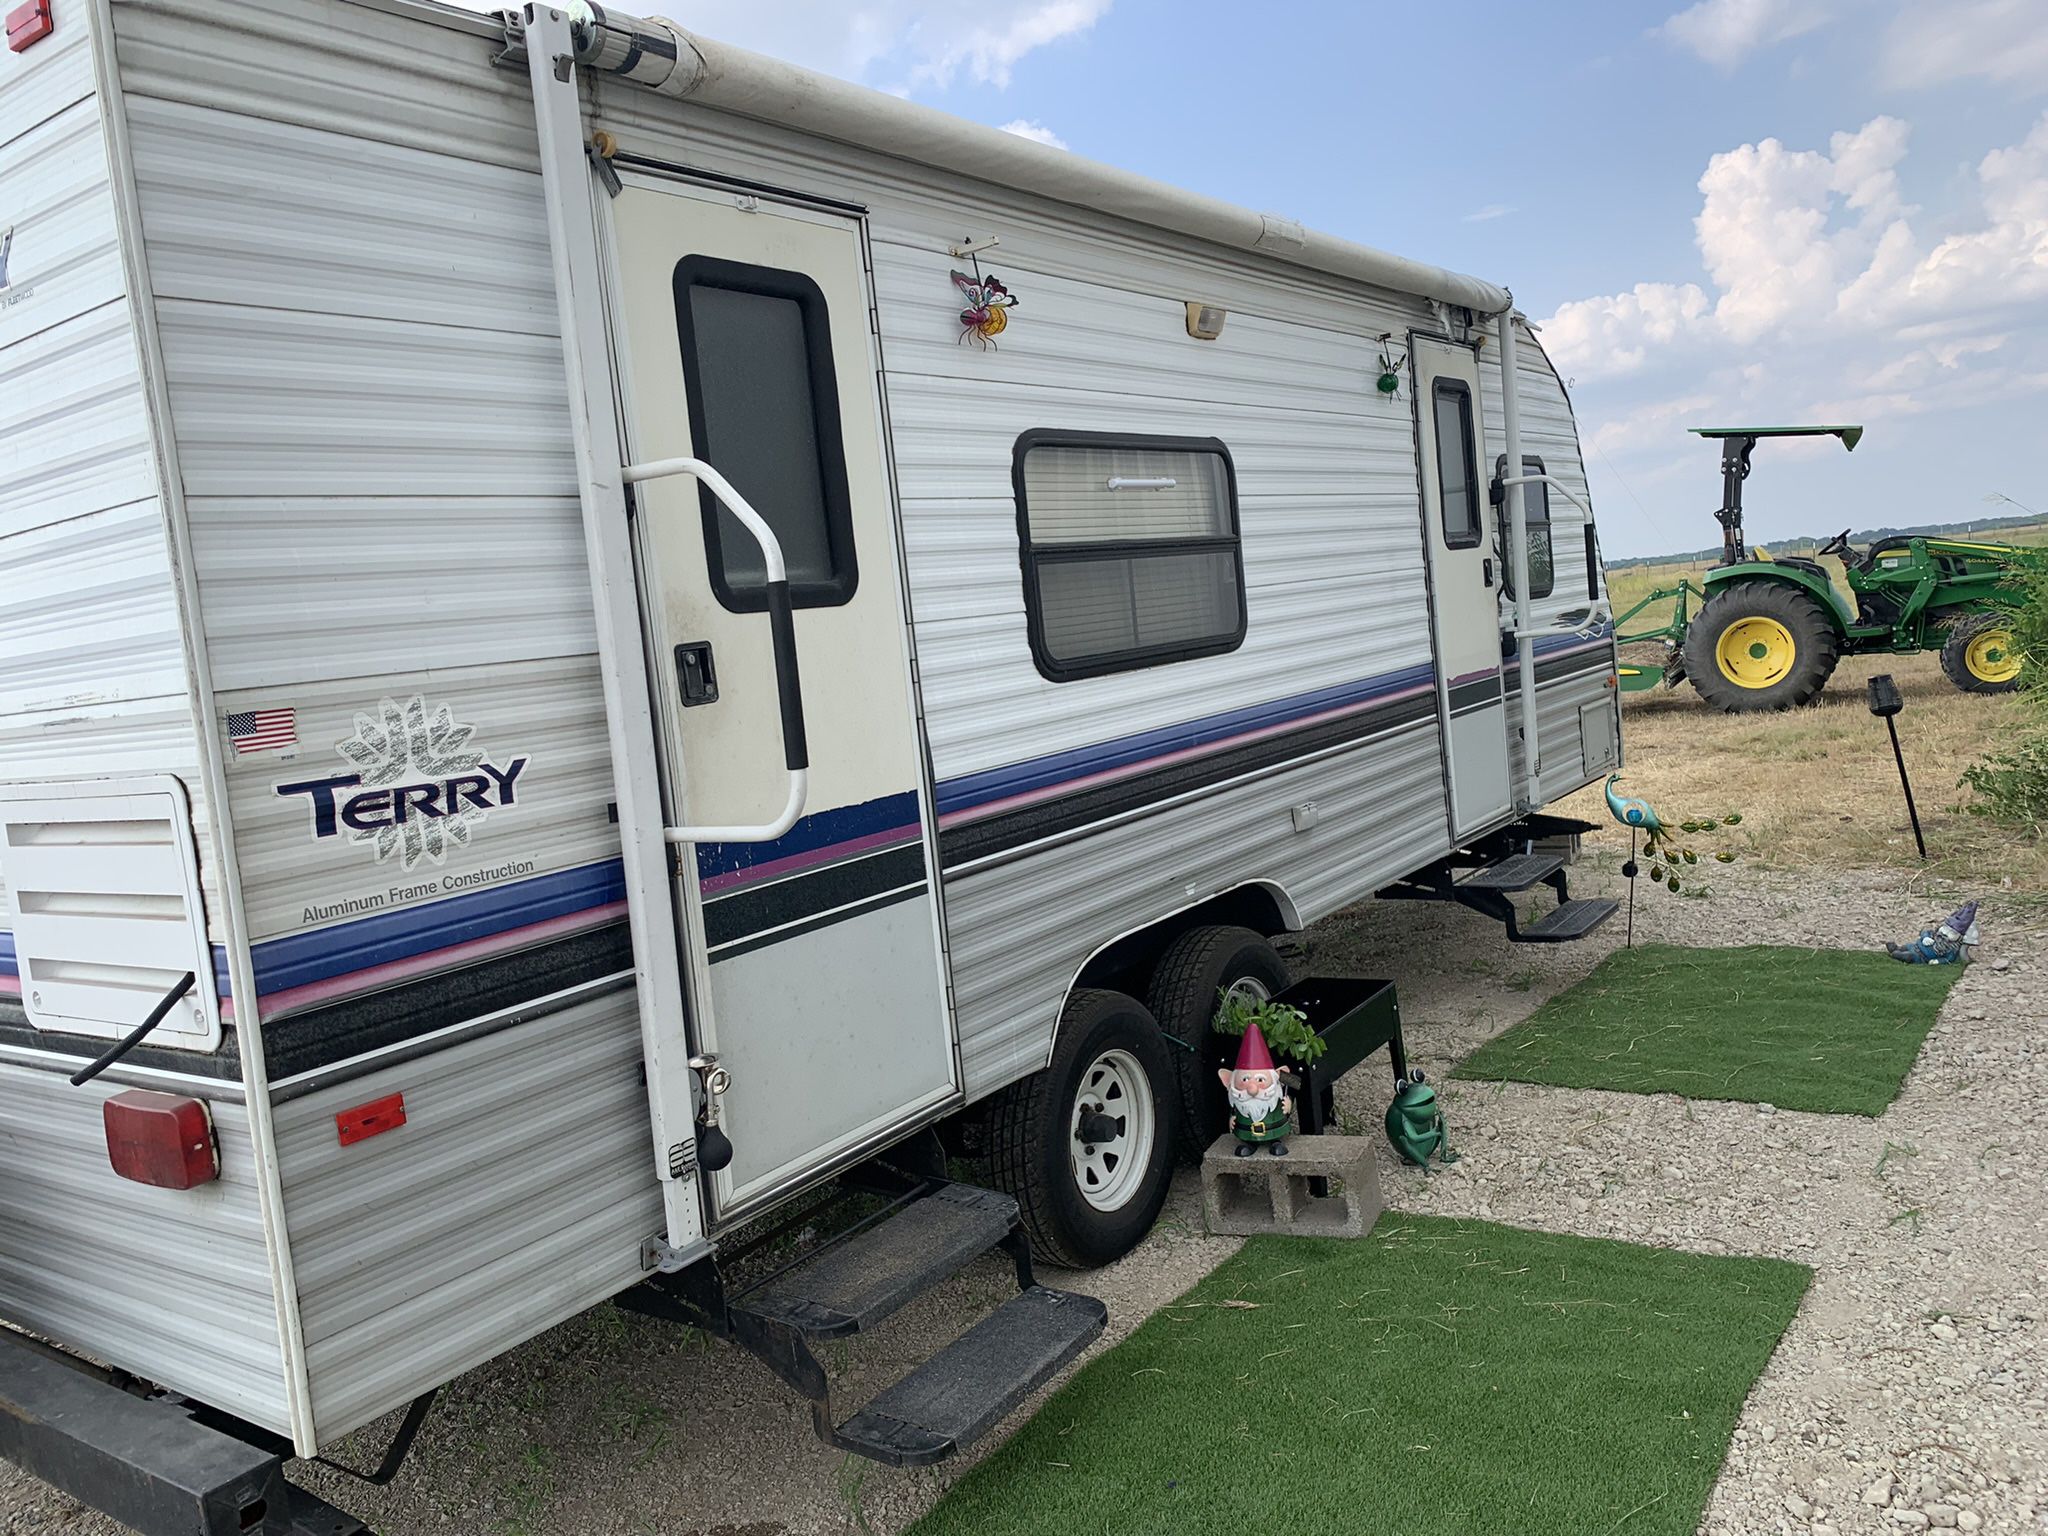 1997 Fleetwood Terry RV 25 LY